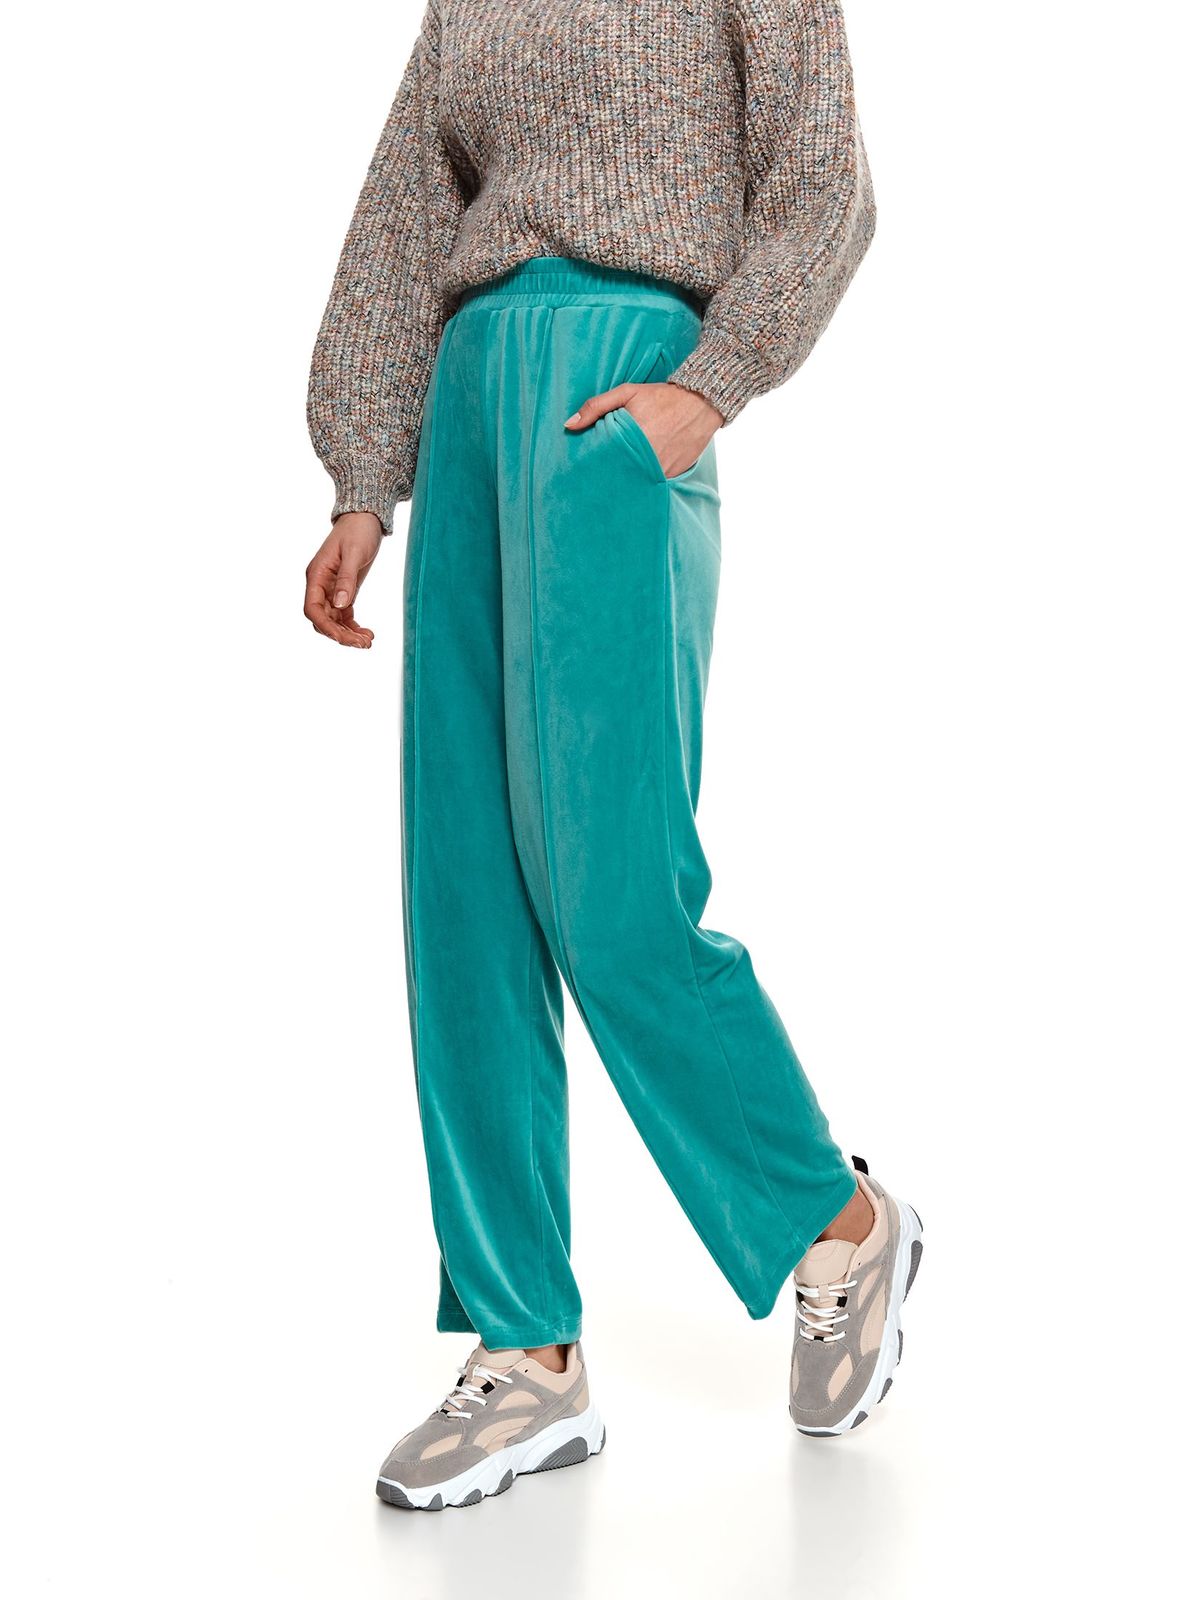 Turquoise trousers velvet with pockets loose fit